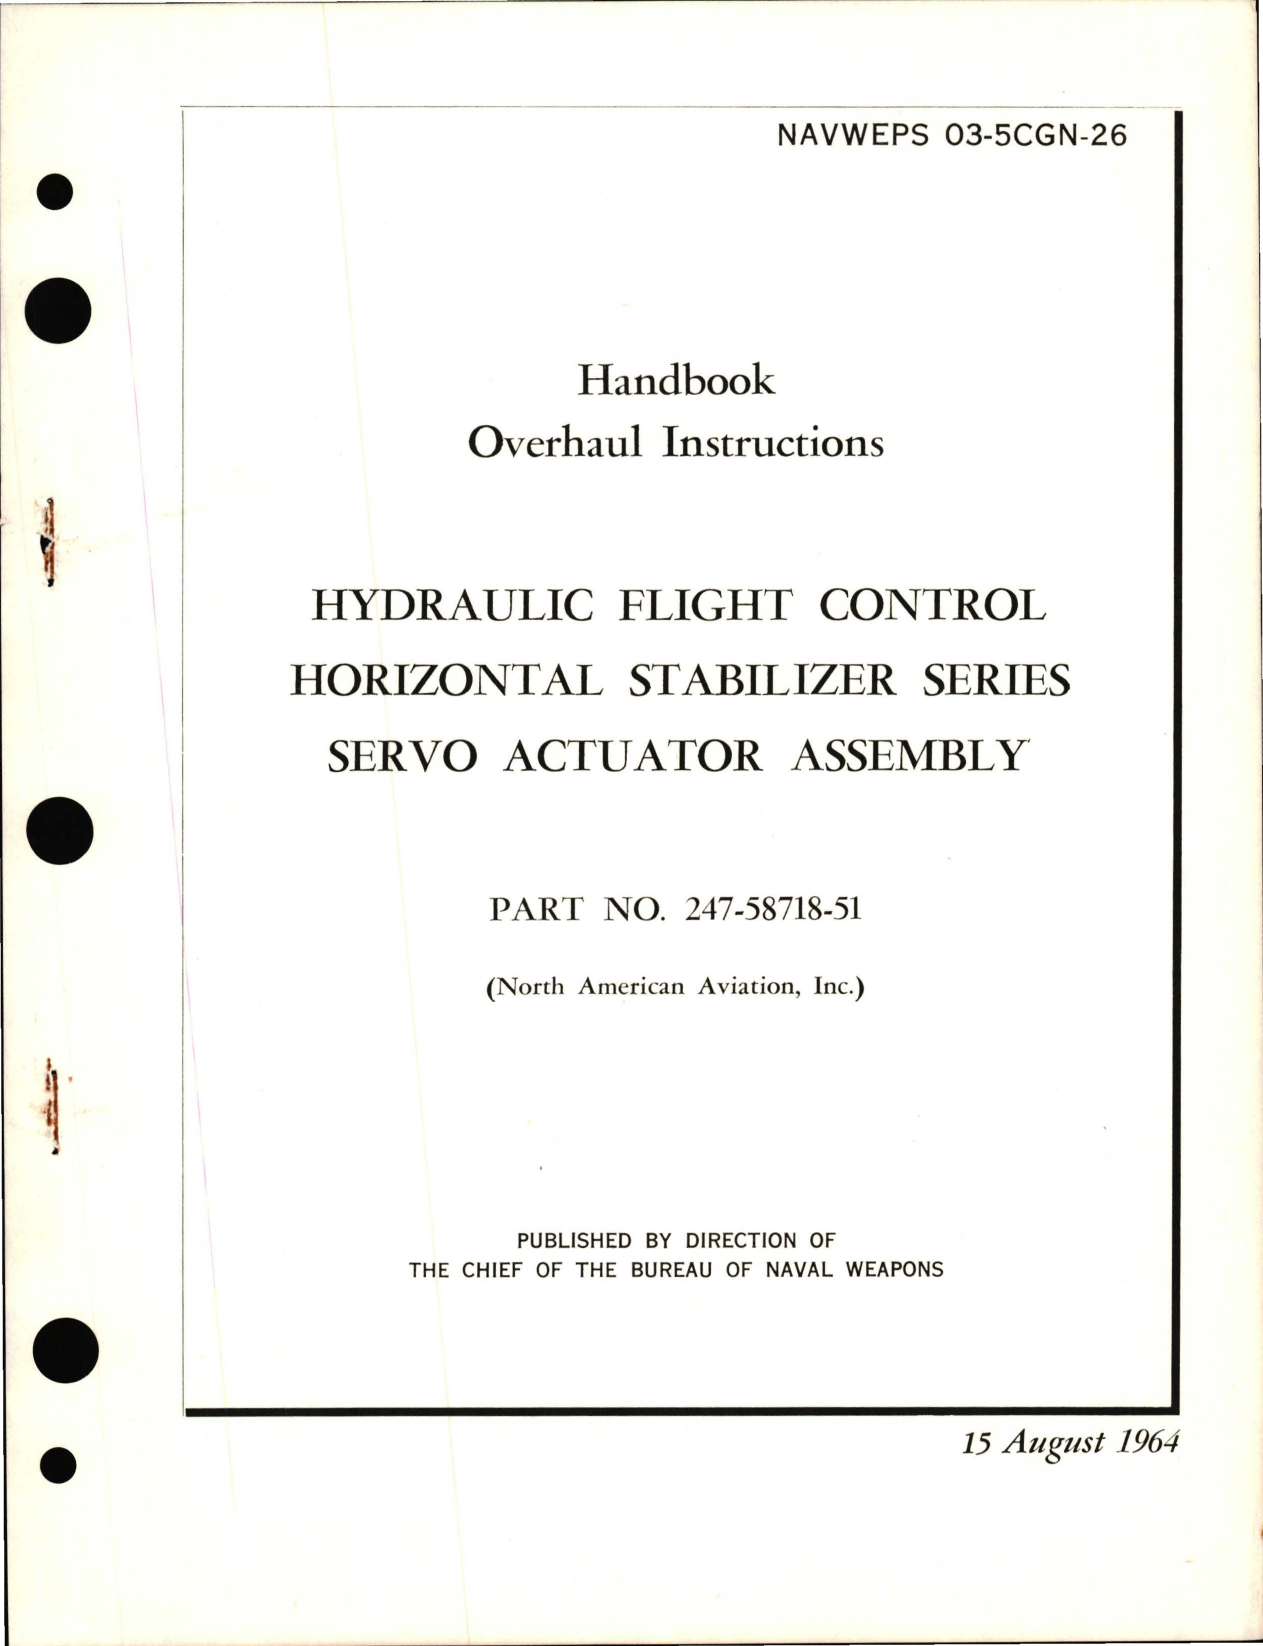 Sample page 1 from AirCorps Library document: Overhaul Instructions for Hydraulic Flight Control Horizontal Stabilizer Series Servo Actuator Assembly - Part 247-58718-51